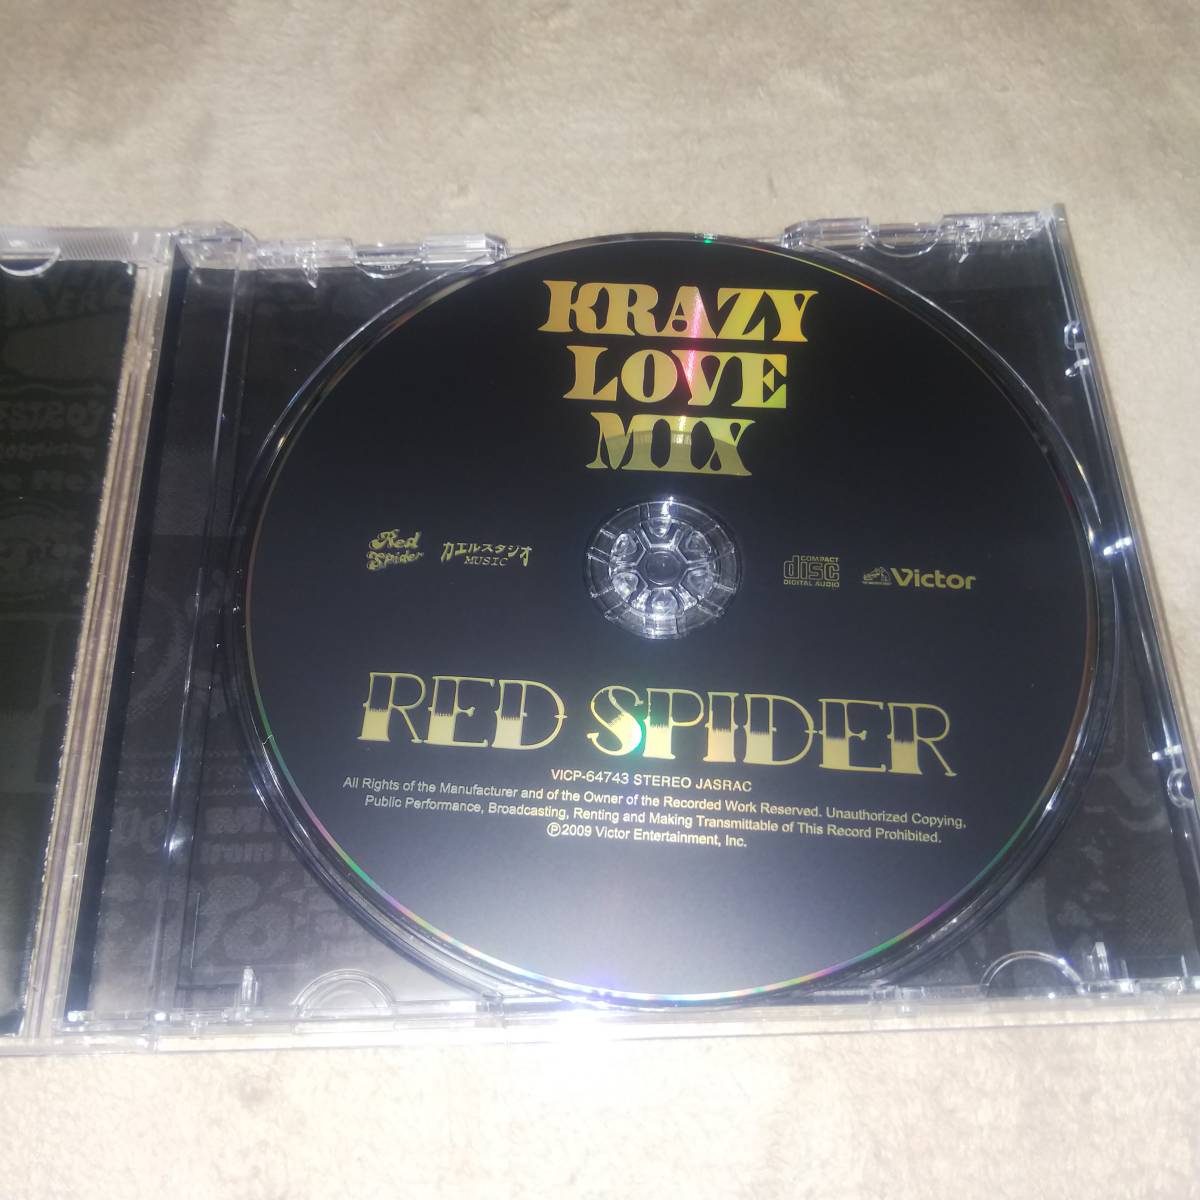 CD RED SPIDER KRAZY LOVE MIX 帯なしの画像4